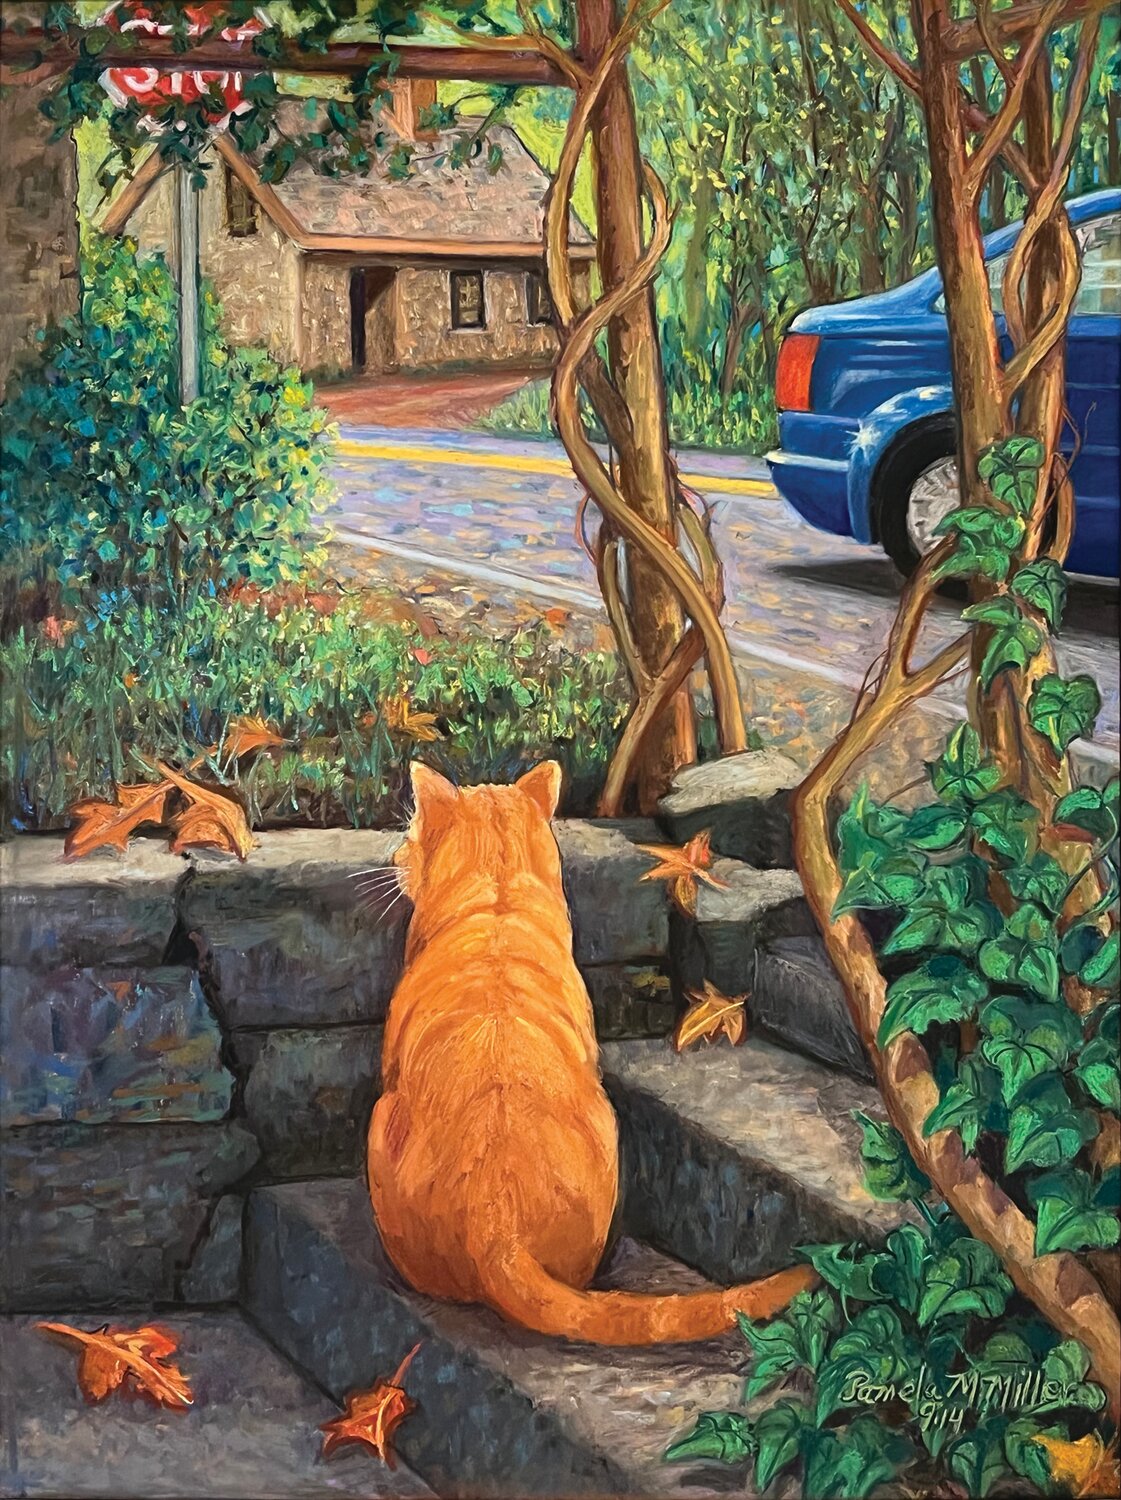 “The Party Cat at Phillips’ Mill” by Pamela Miller, the 2023 Signature Image for the 94th Phillips’ Mill Juried Art Exhibition.